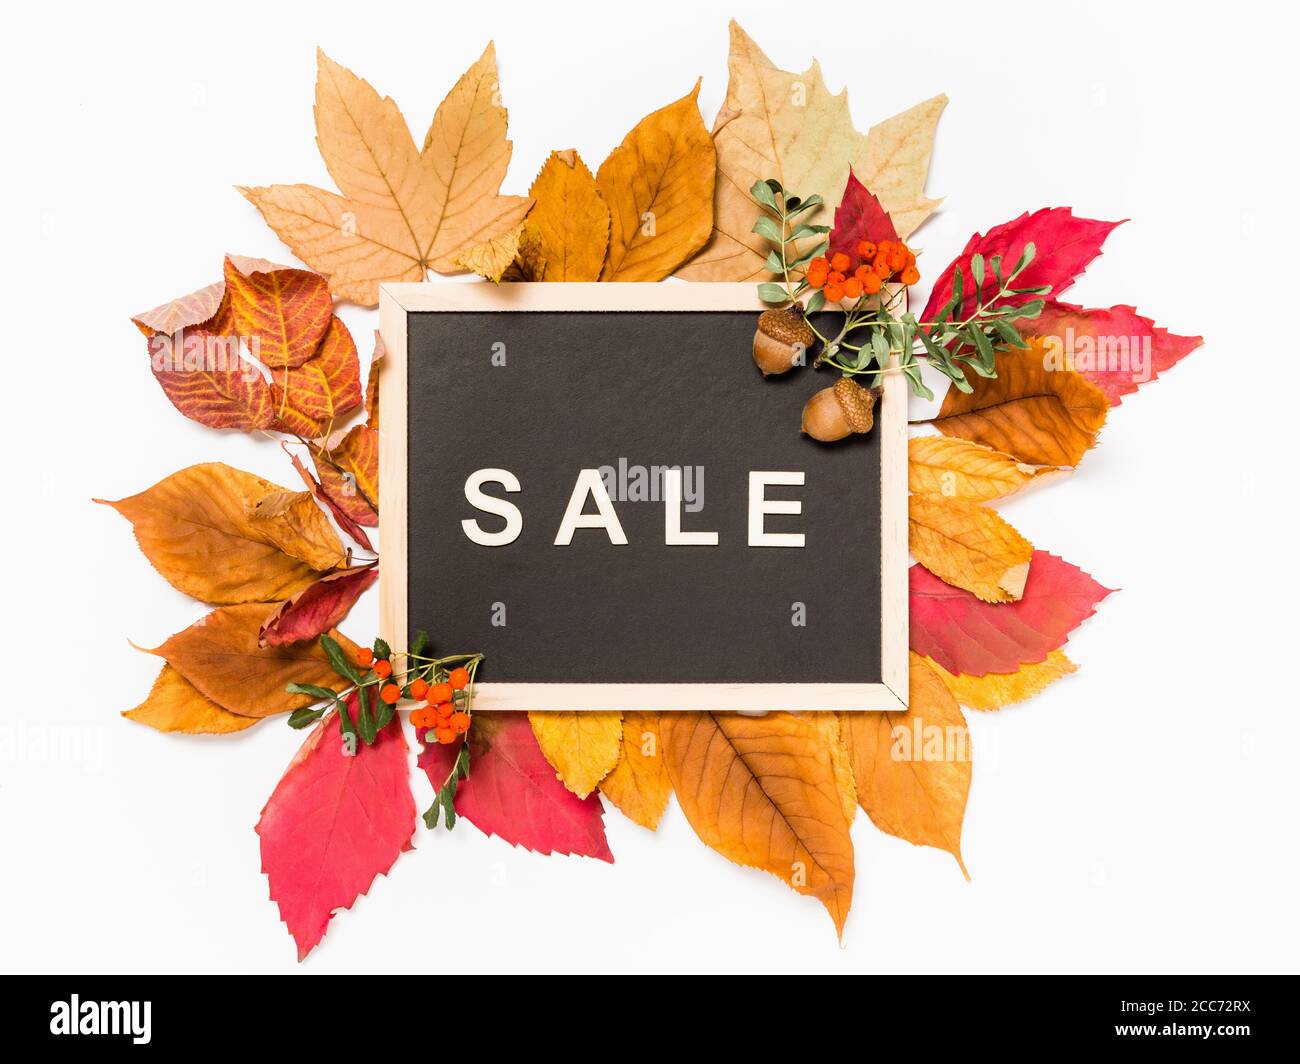 Autumn sale: blackboard with word Sale in wooden letters on a pile of red and yellow fall leaves on white background. Seasonal sale and discount deal Stock Photo